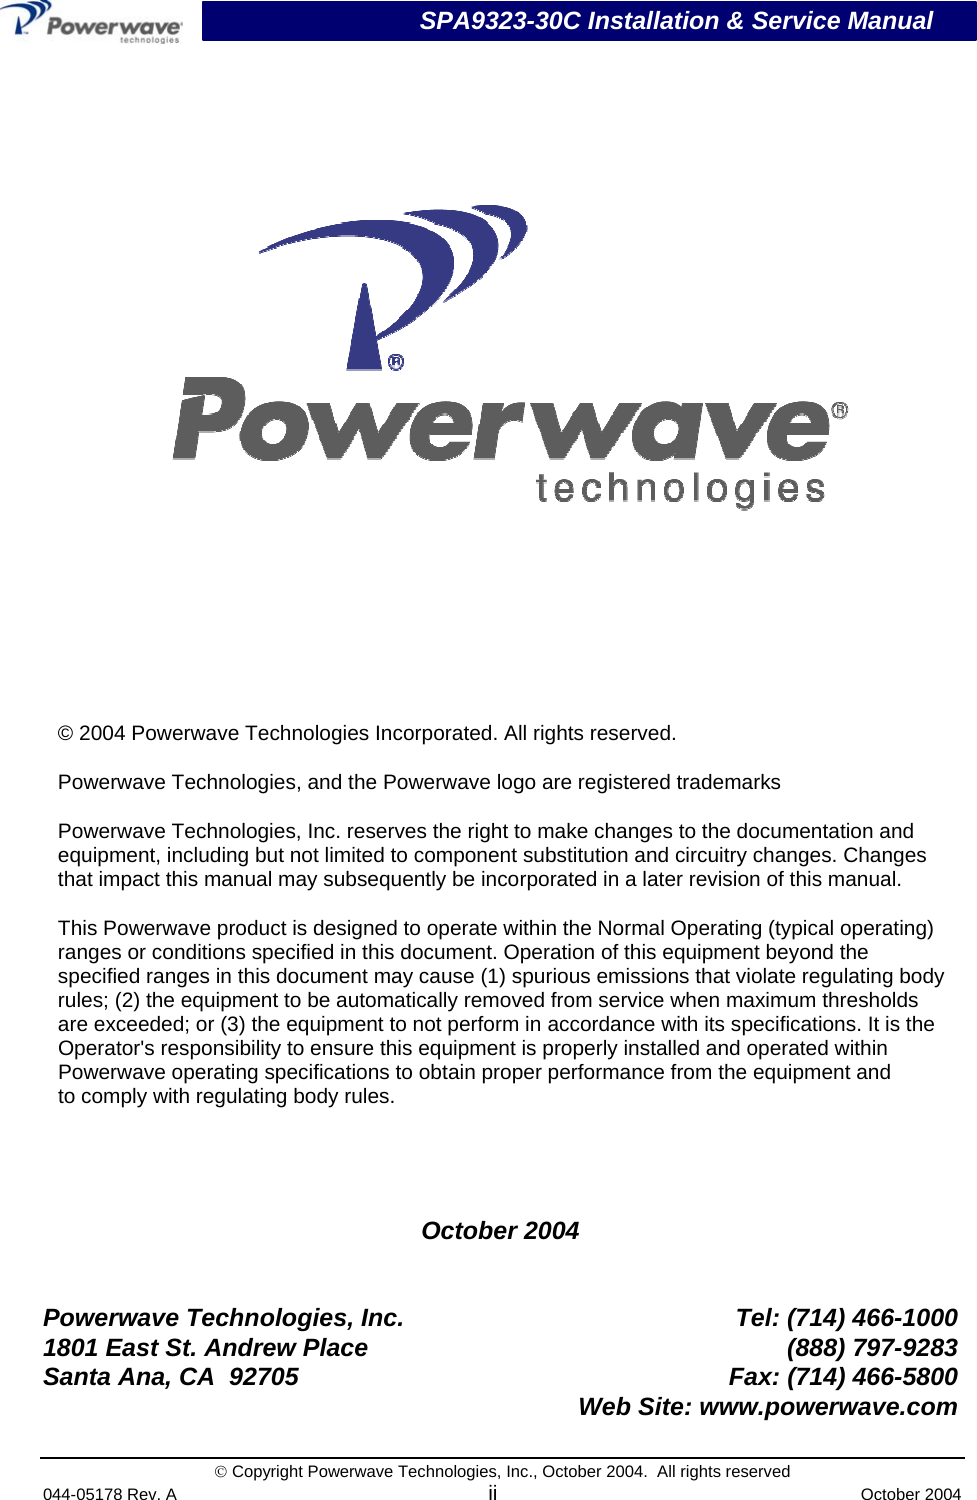                           SPA9323-30C Installation &amp; Service Manual © Copyright Powerwave Technologies, Inc., October 2004.  All rights reserved 044-05178 Rev. A ii  October 2004    October 2004   Powerwave Technologies, Inc.  Tel: (714) 466-1000 1801 East St. Andrew Place  (888) 797-9283 Santa Ana, CA  92705  Fax: (714) 466-5800   Web Site: www.powerwave.com      © 2004 Powerwave Technologies Incorporated. All rights reserved. Powerwave Technologies, and the Powerwave logo are registered trademarks Powerwave Technologies, Inc. reserves the right to make changes to the documentation and equipment, including but not limited to component substitution and circuitry changes. Changes that impact this manual may subsequently be incorporated in a later revision of this manual. This Powerwave product is designed to operate within the Normal Operating (typical operating) ranges or conditions specified in this document. Operation of this equipment beyond the specified ranges in this document may cause (1) spurious emissions that violate regulating body rules; (2) the equipment to be automatically removed from service when maximum thresholds are exceeded; or (3) the equipment to not perform in accordance with its specifications. It is the Operator&apos;s responsibility to ensure this equipment is properly installed and operated within Powerwave operating specifications to obtain proper performance from the equipment and to comply with regulating body rules. 